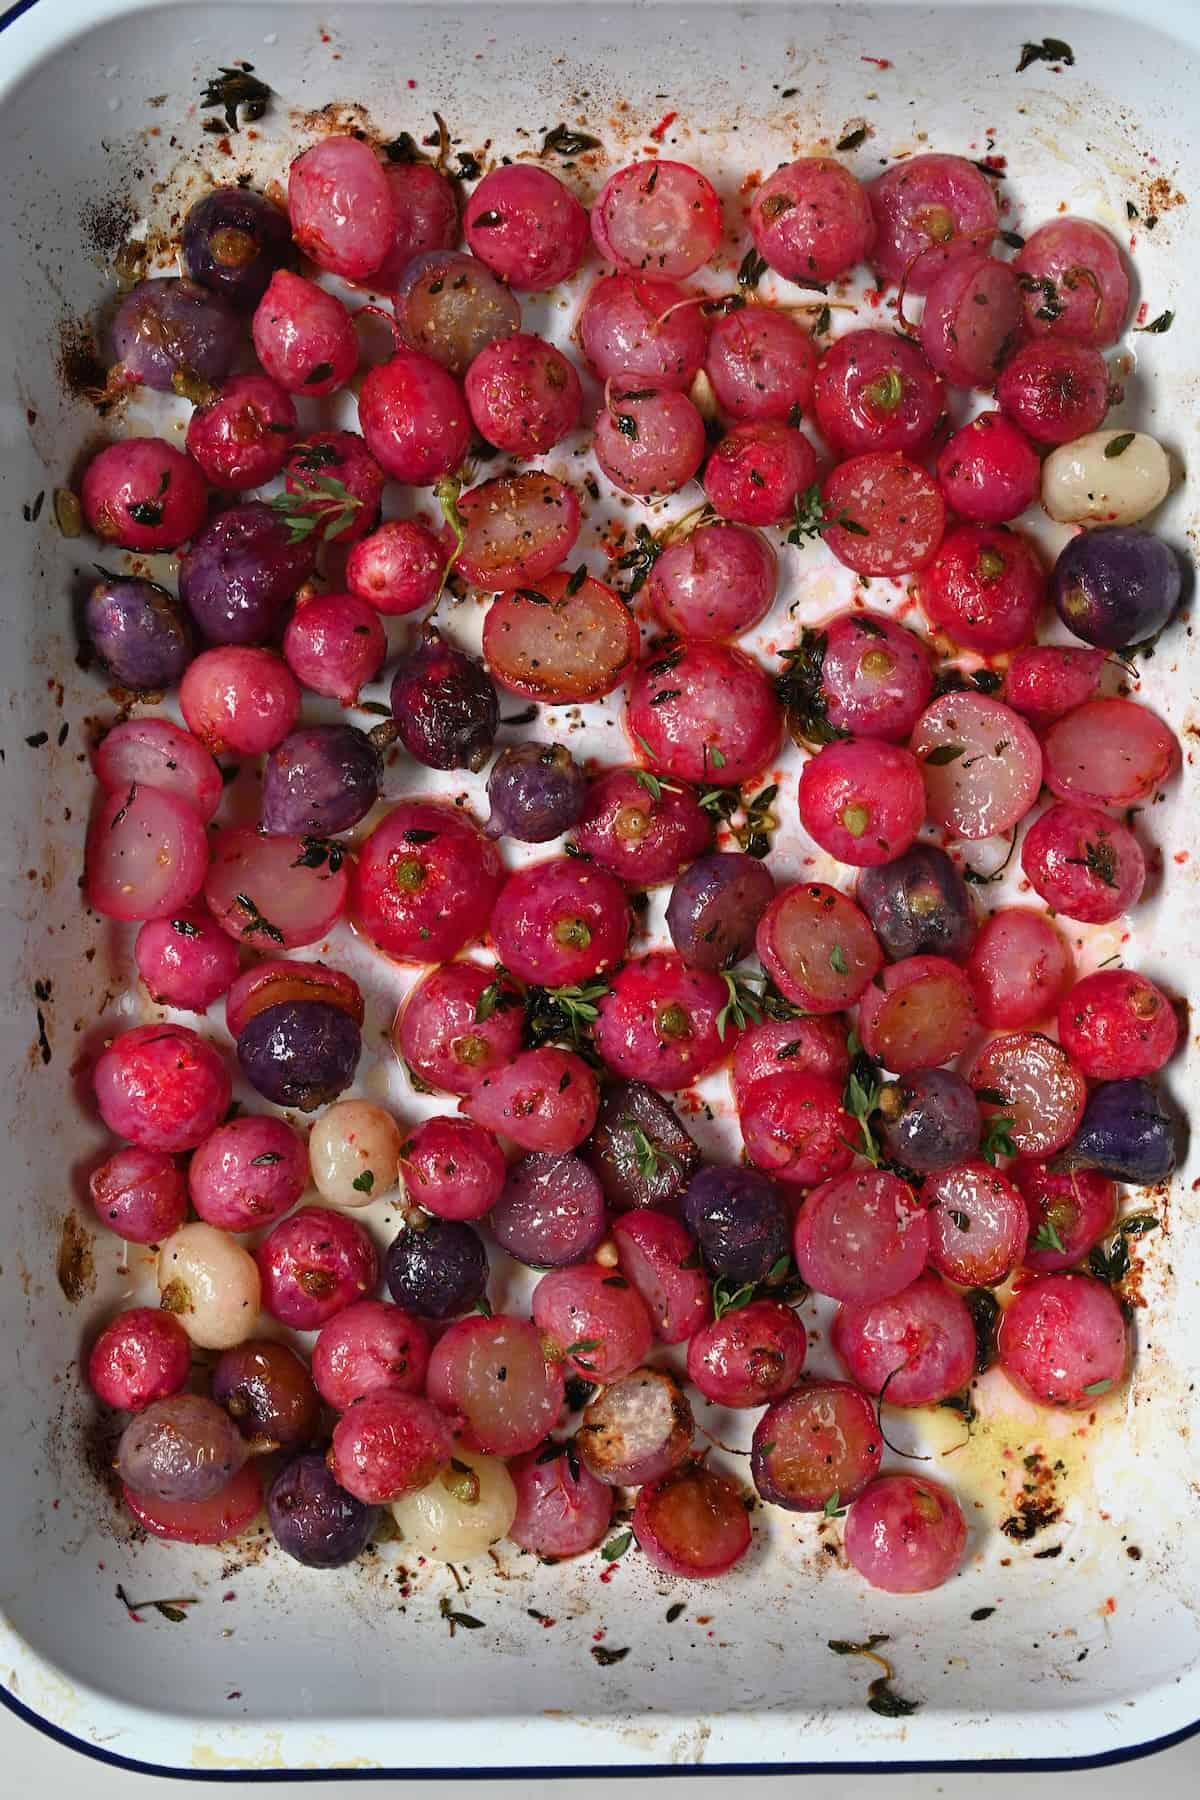 Roasted radishes in a baking tray